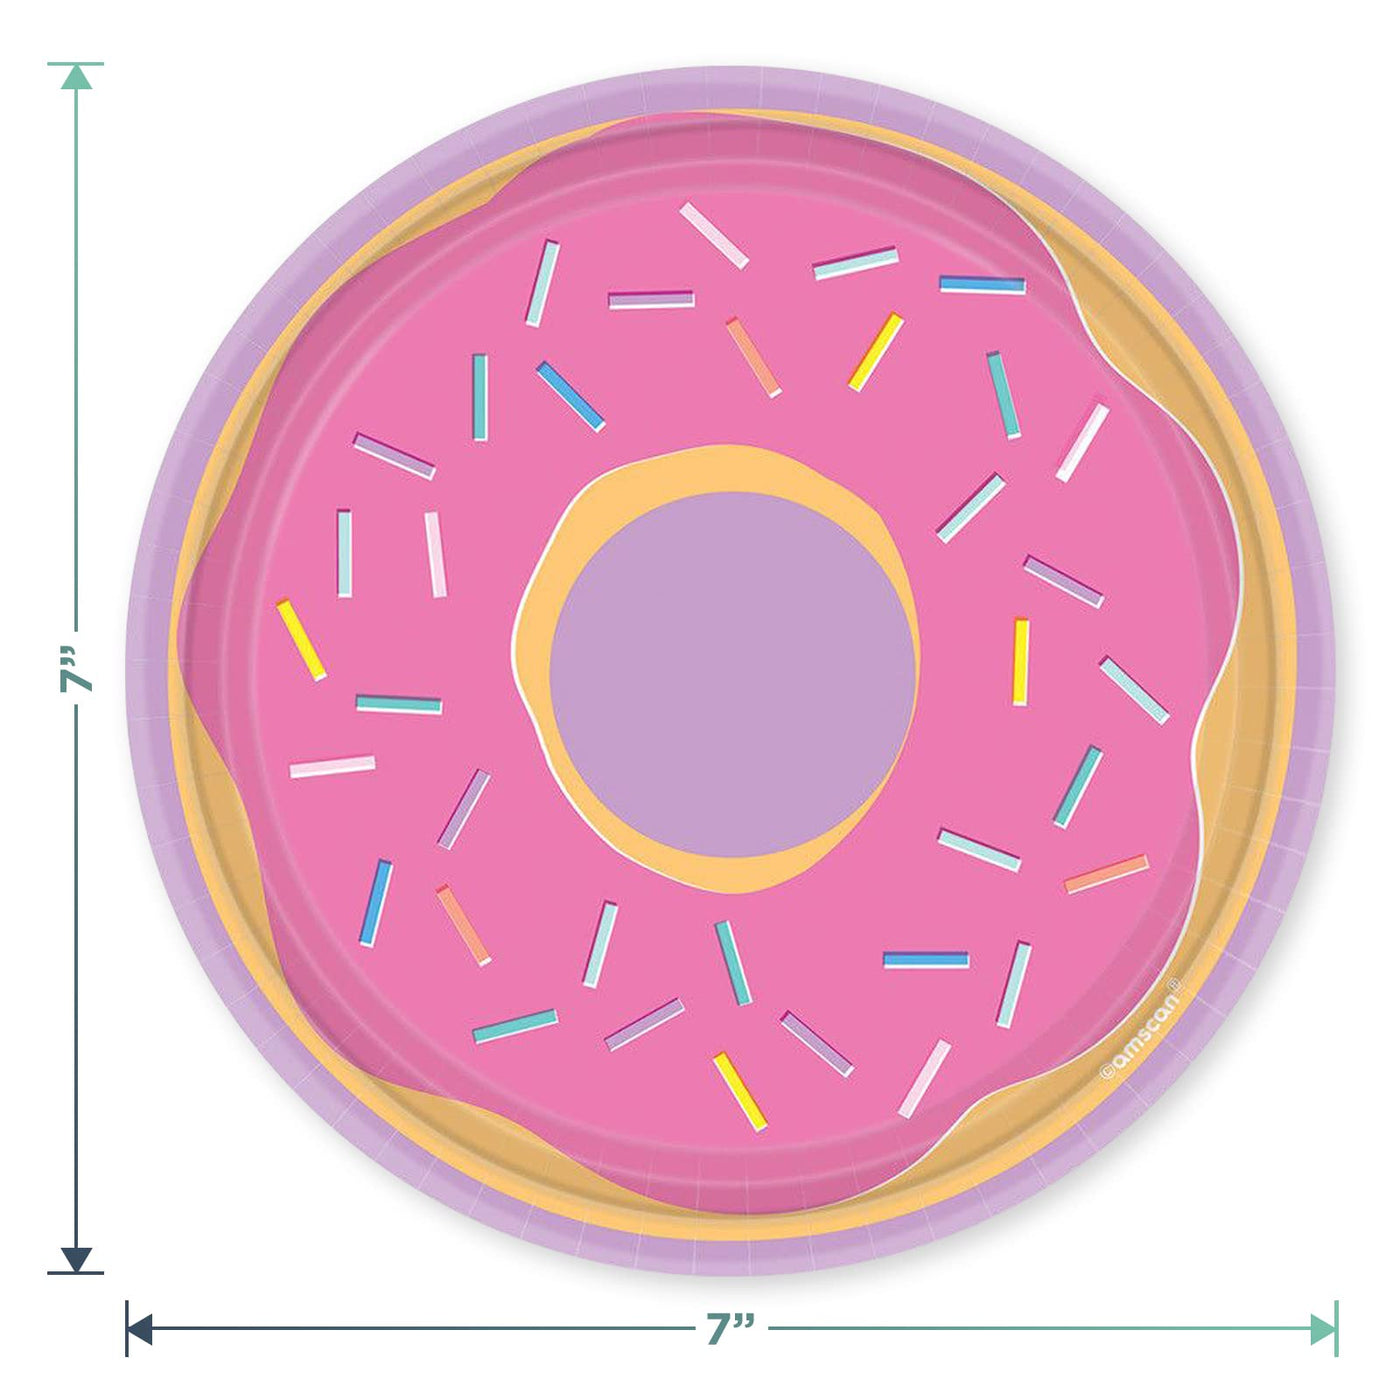 Donut Party Sprinkles Paper Dessert Plates, Napkins, Cups, Table Cover, and Hanging Cutouts (Serves 16)